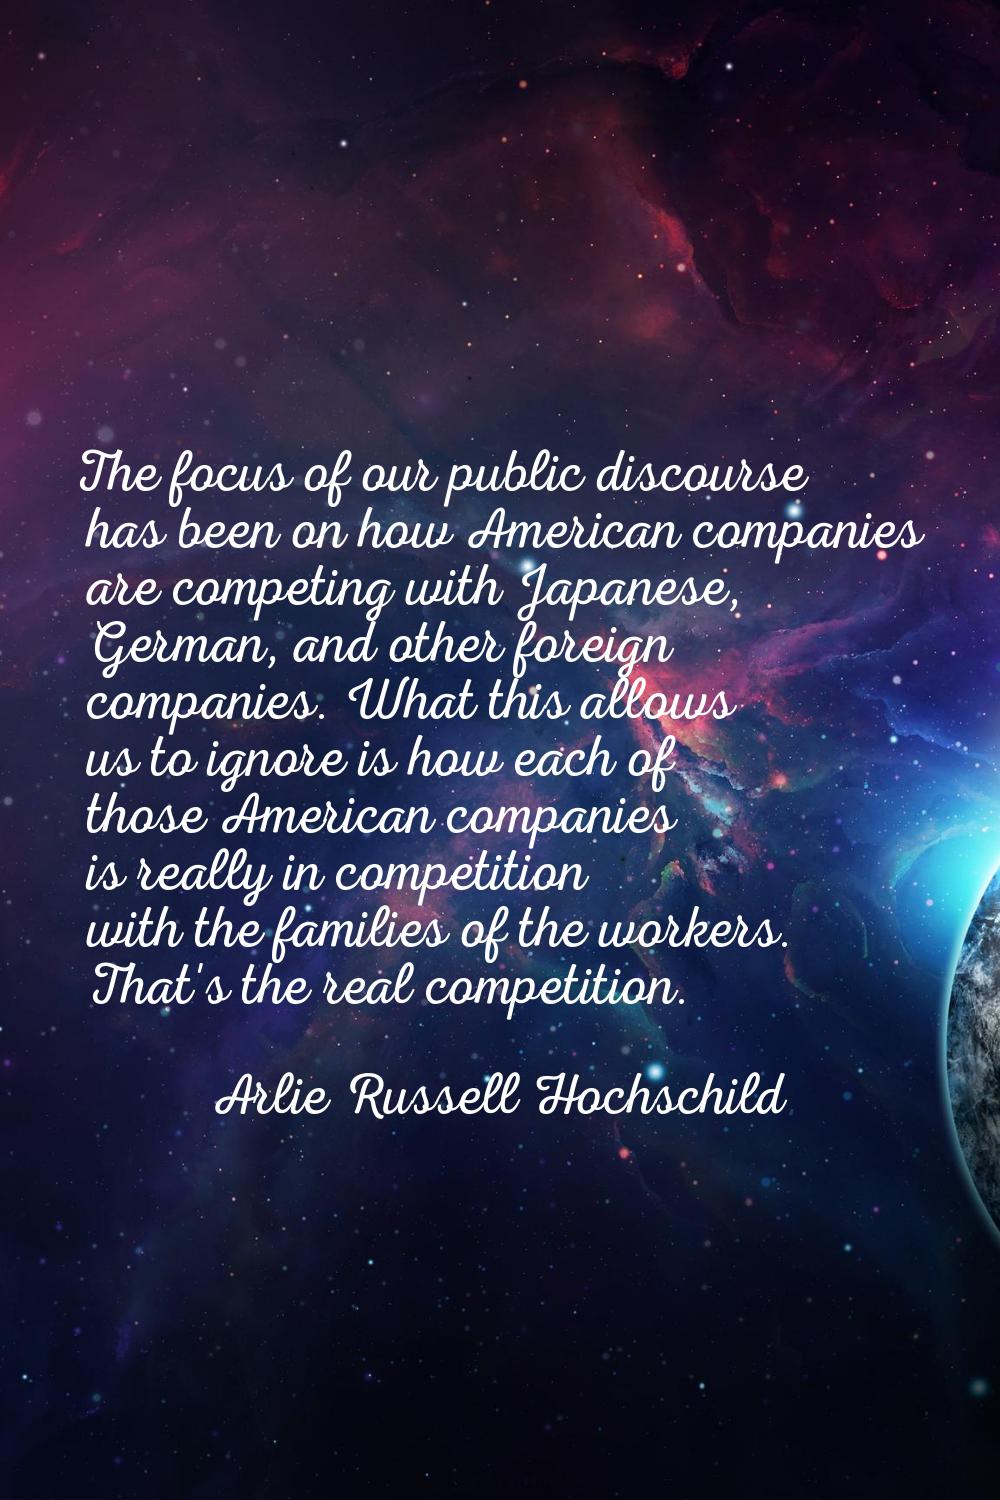 The focus of our public discourse has been on how American companies are competing with Japanese, G